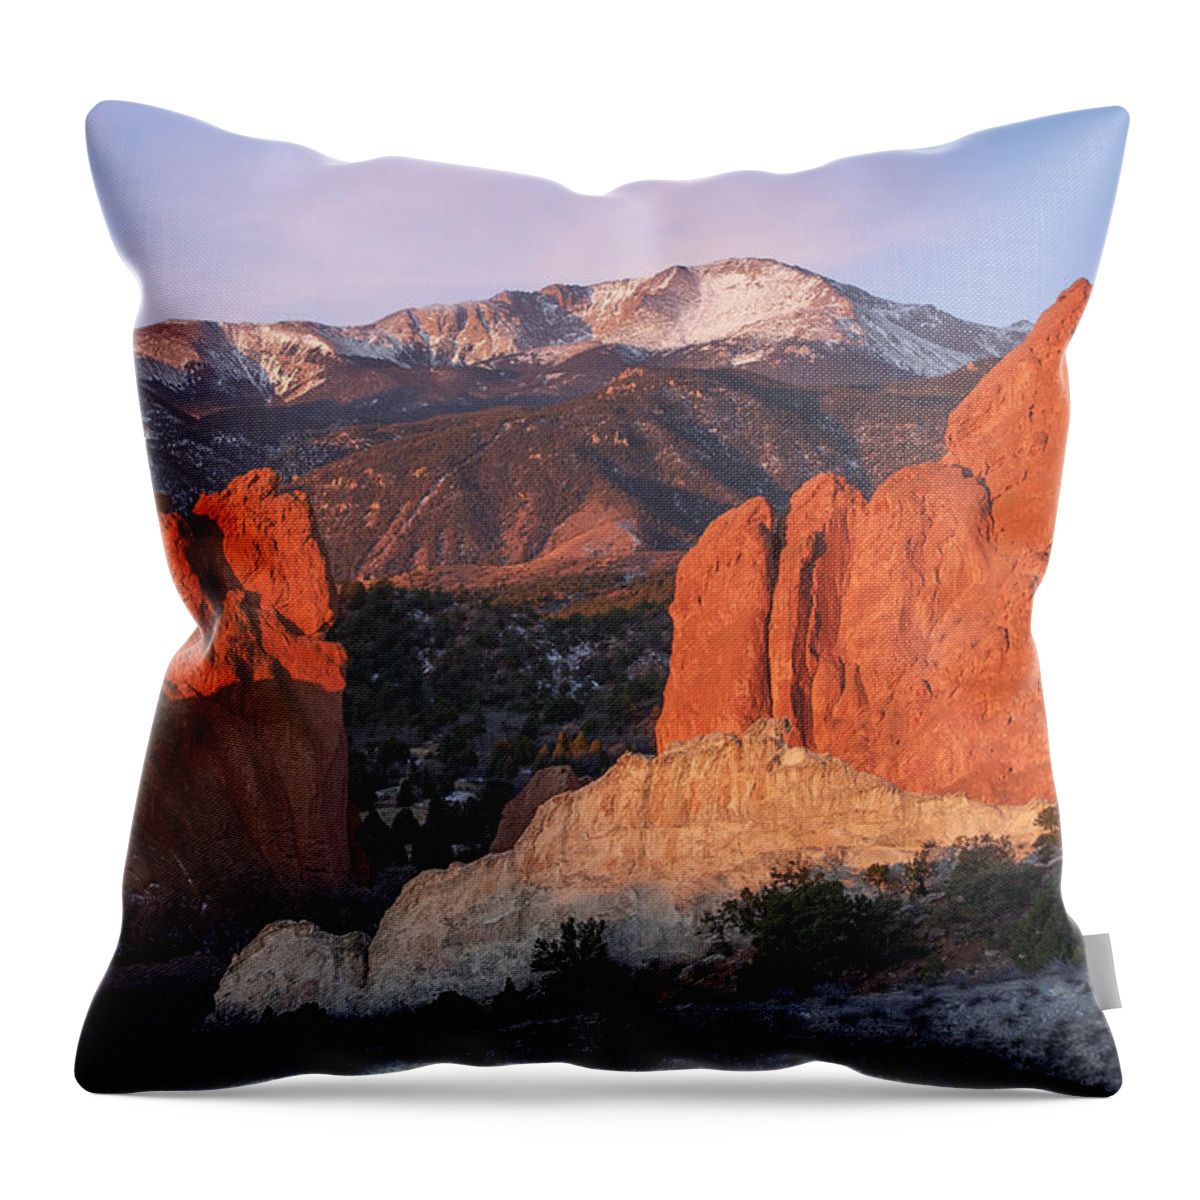 Pikes Throw Pillow featuring the photograph Pikes Peak Sunrise by Aaron Spong